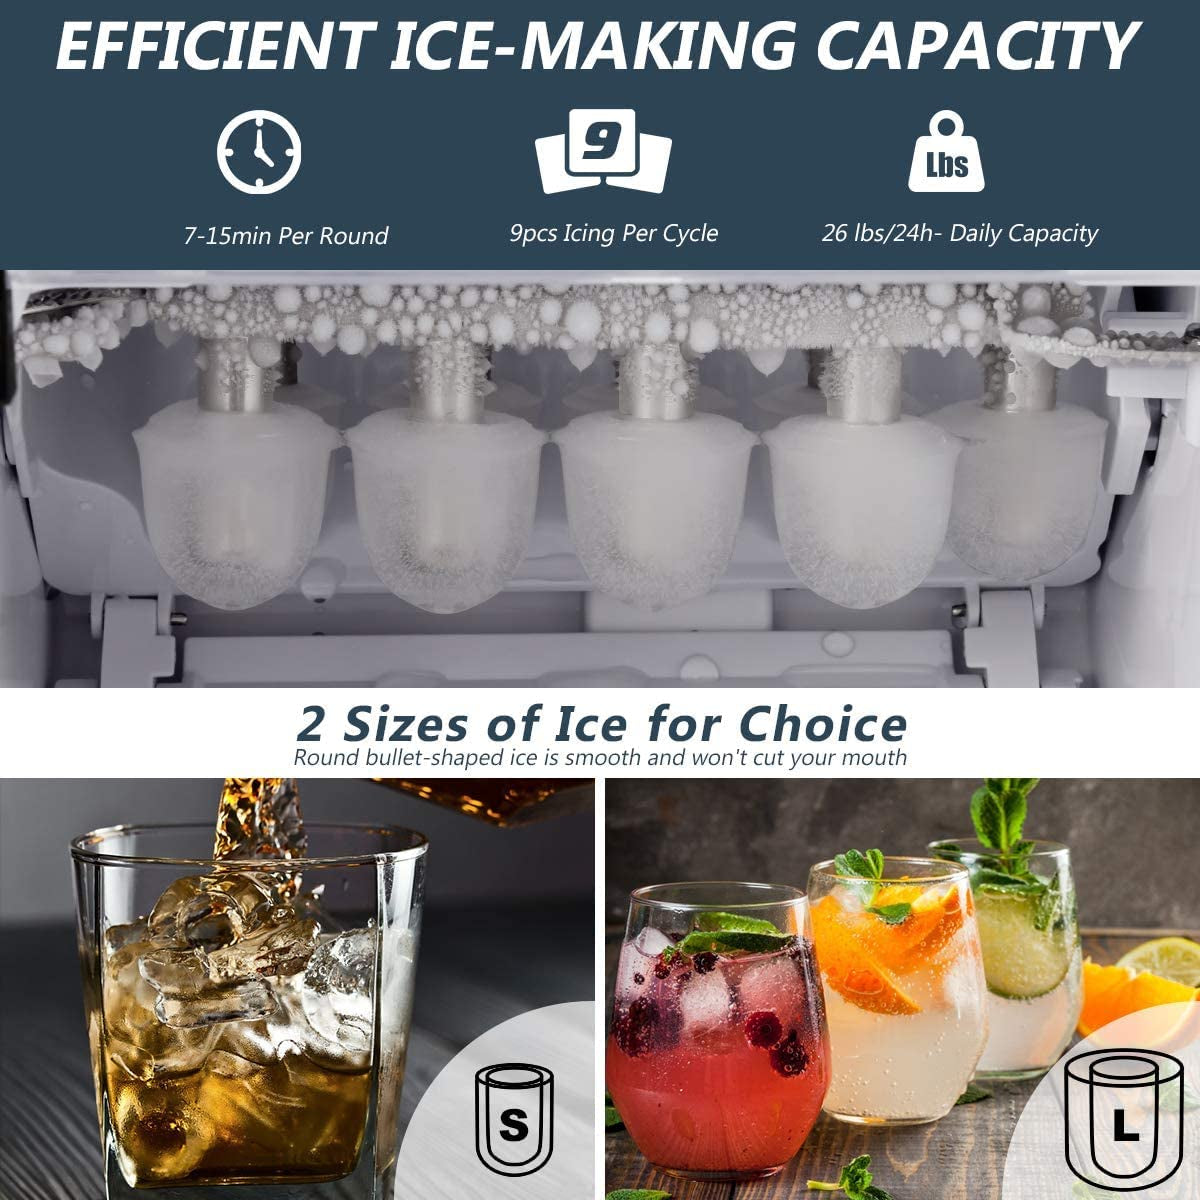 Countertop Ice Maker, Self-Cleaning Function, Ice Cubes Ready in 7 Minutes, 26LBS/24H Portable Stainless Steel Tabletop Ice Machine with Ice Scoop and Basket, Perfect for Home, Bar, Silver